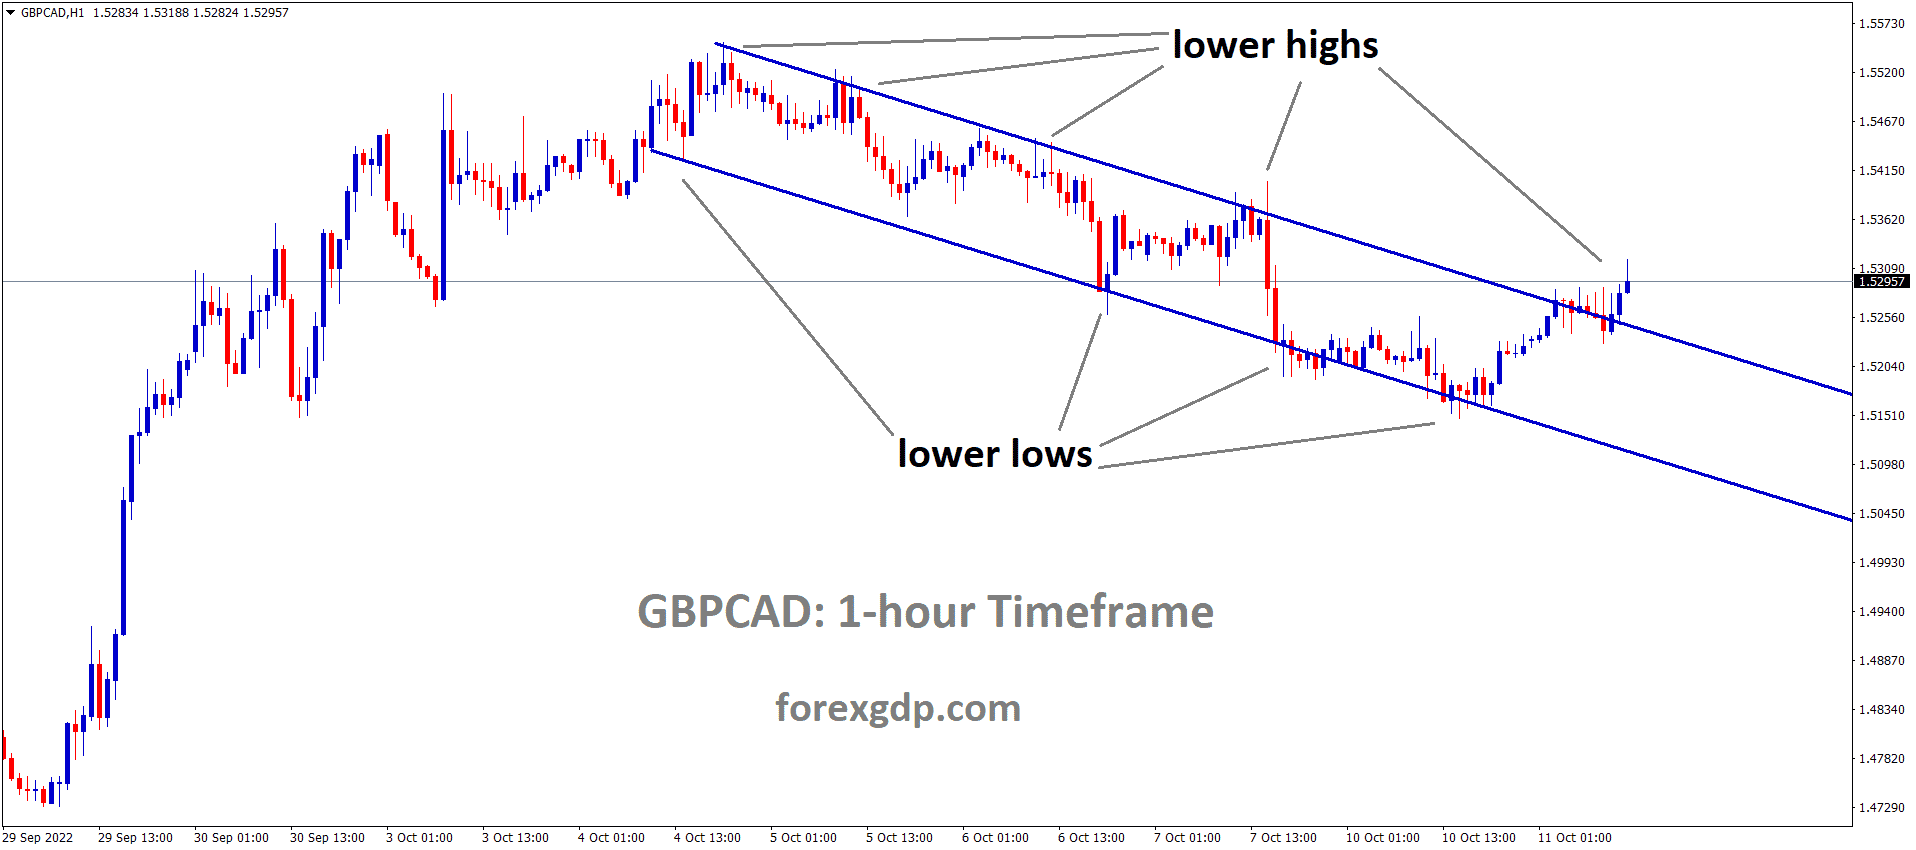 GBPCAD is moving in the Descending channel and the market has reached the lower high area of the channel 1